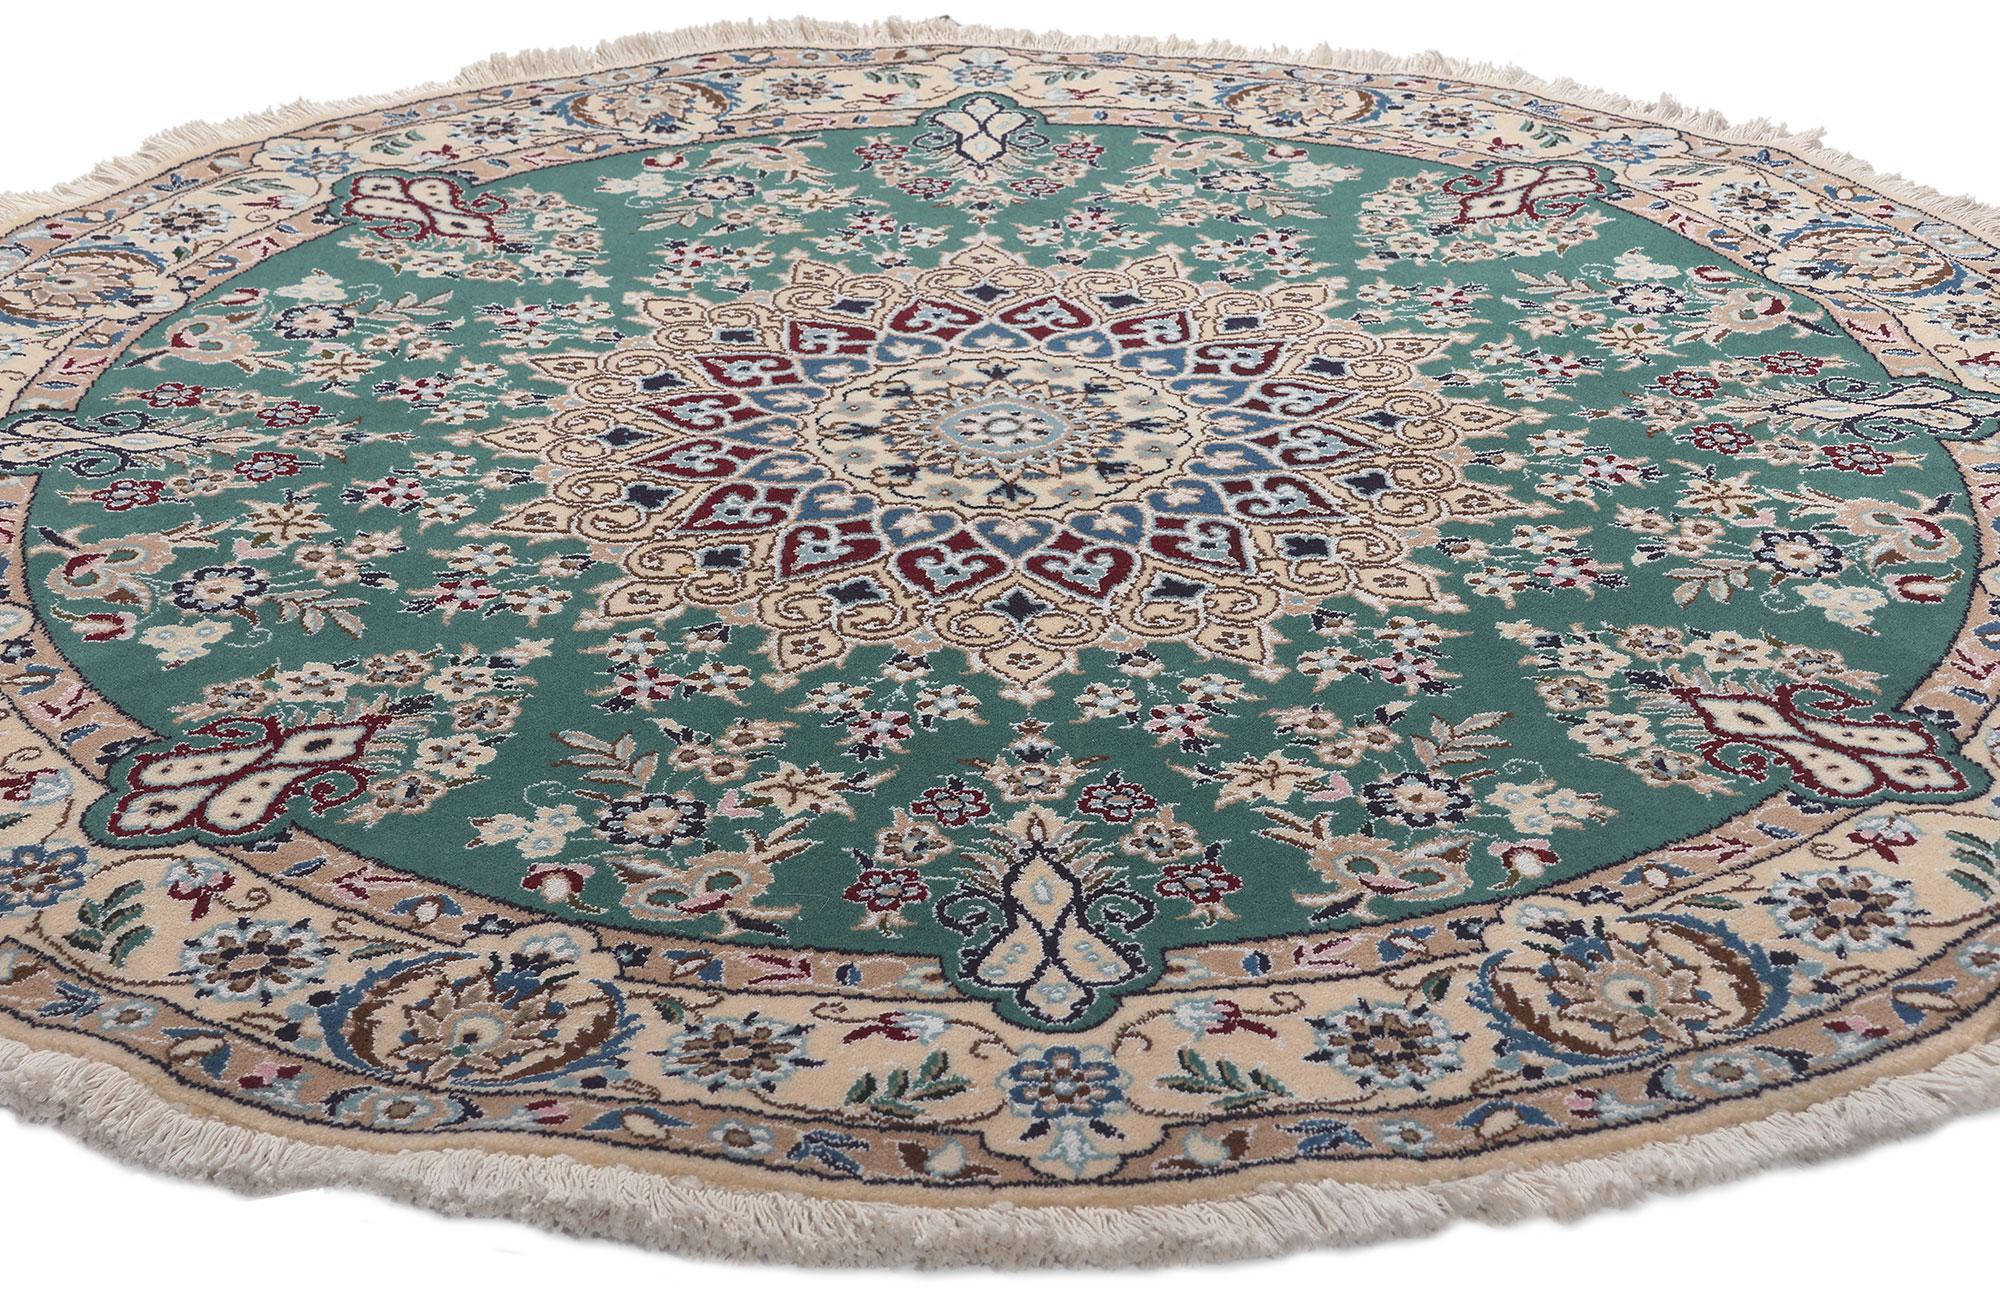 78596 Vintage Persian Nain Round Rug, 04'08 x 04'08. 
Emanating timeless style with lavish details and texture, this vintage Persian Nain round area rug is a captivating vision of woven beauty. The intricate floral embellishments and dreamy colorway